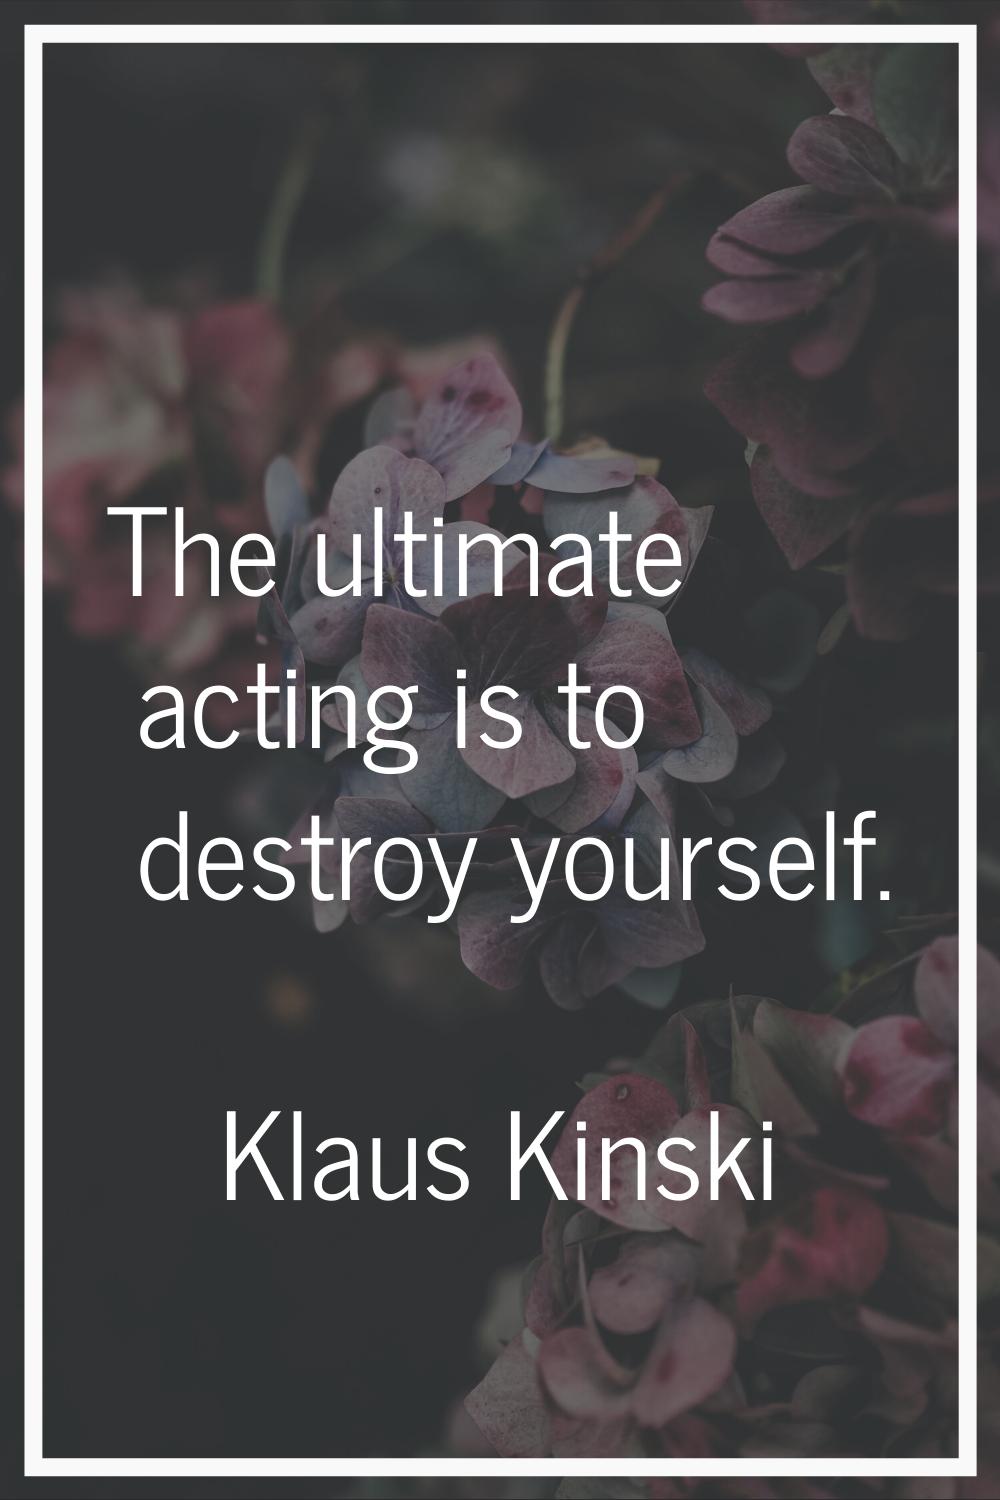 The ultimate acting is to destroy yourself.